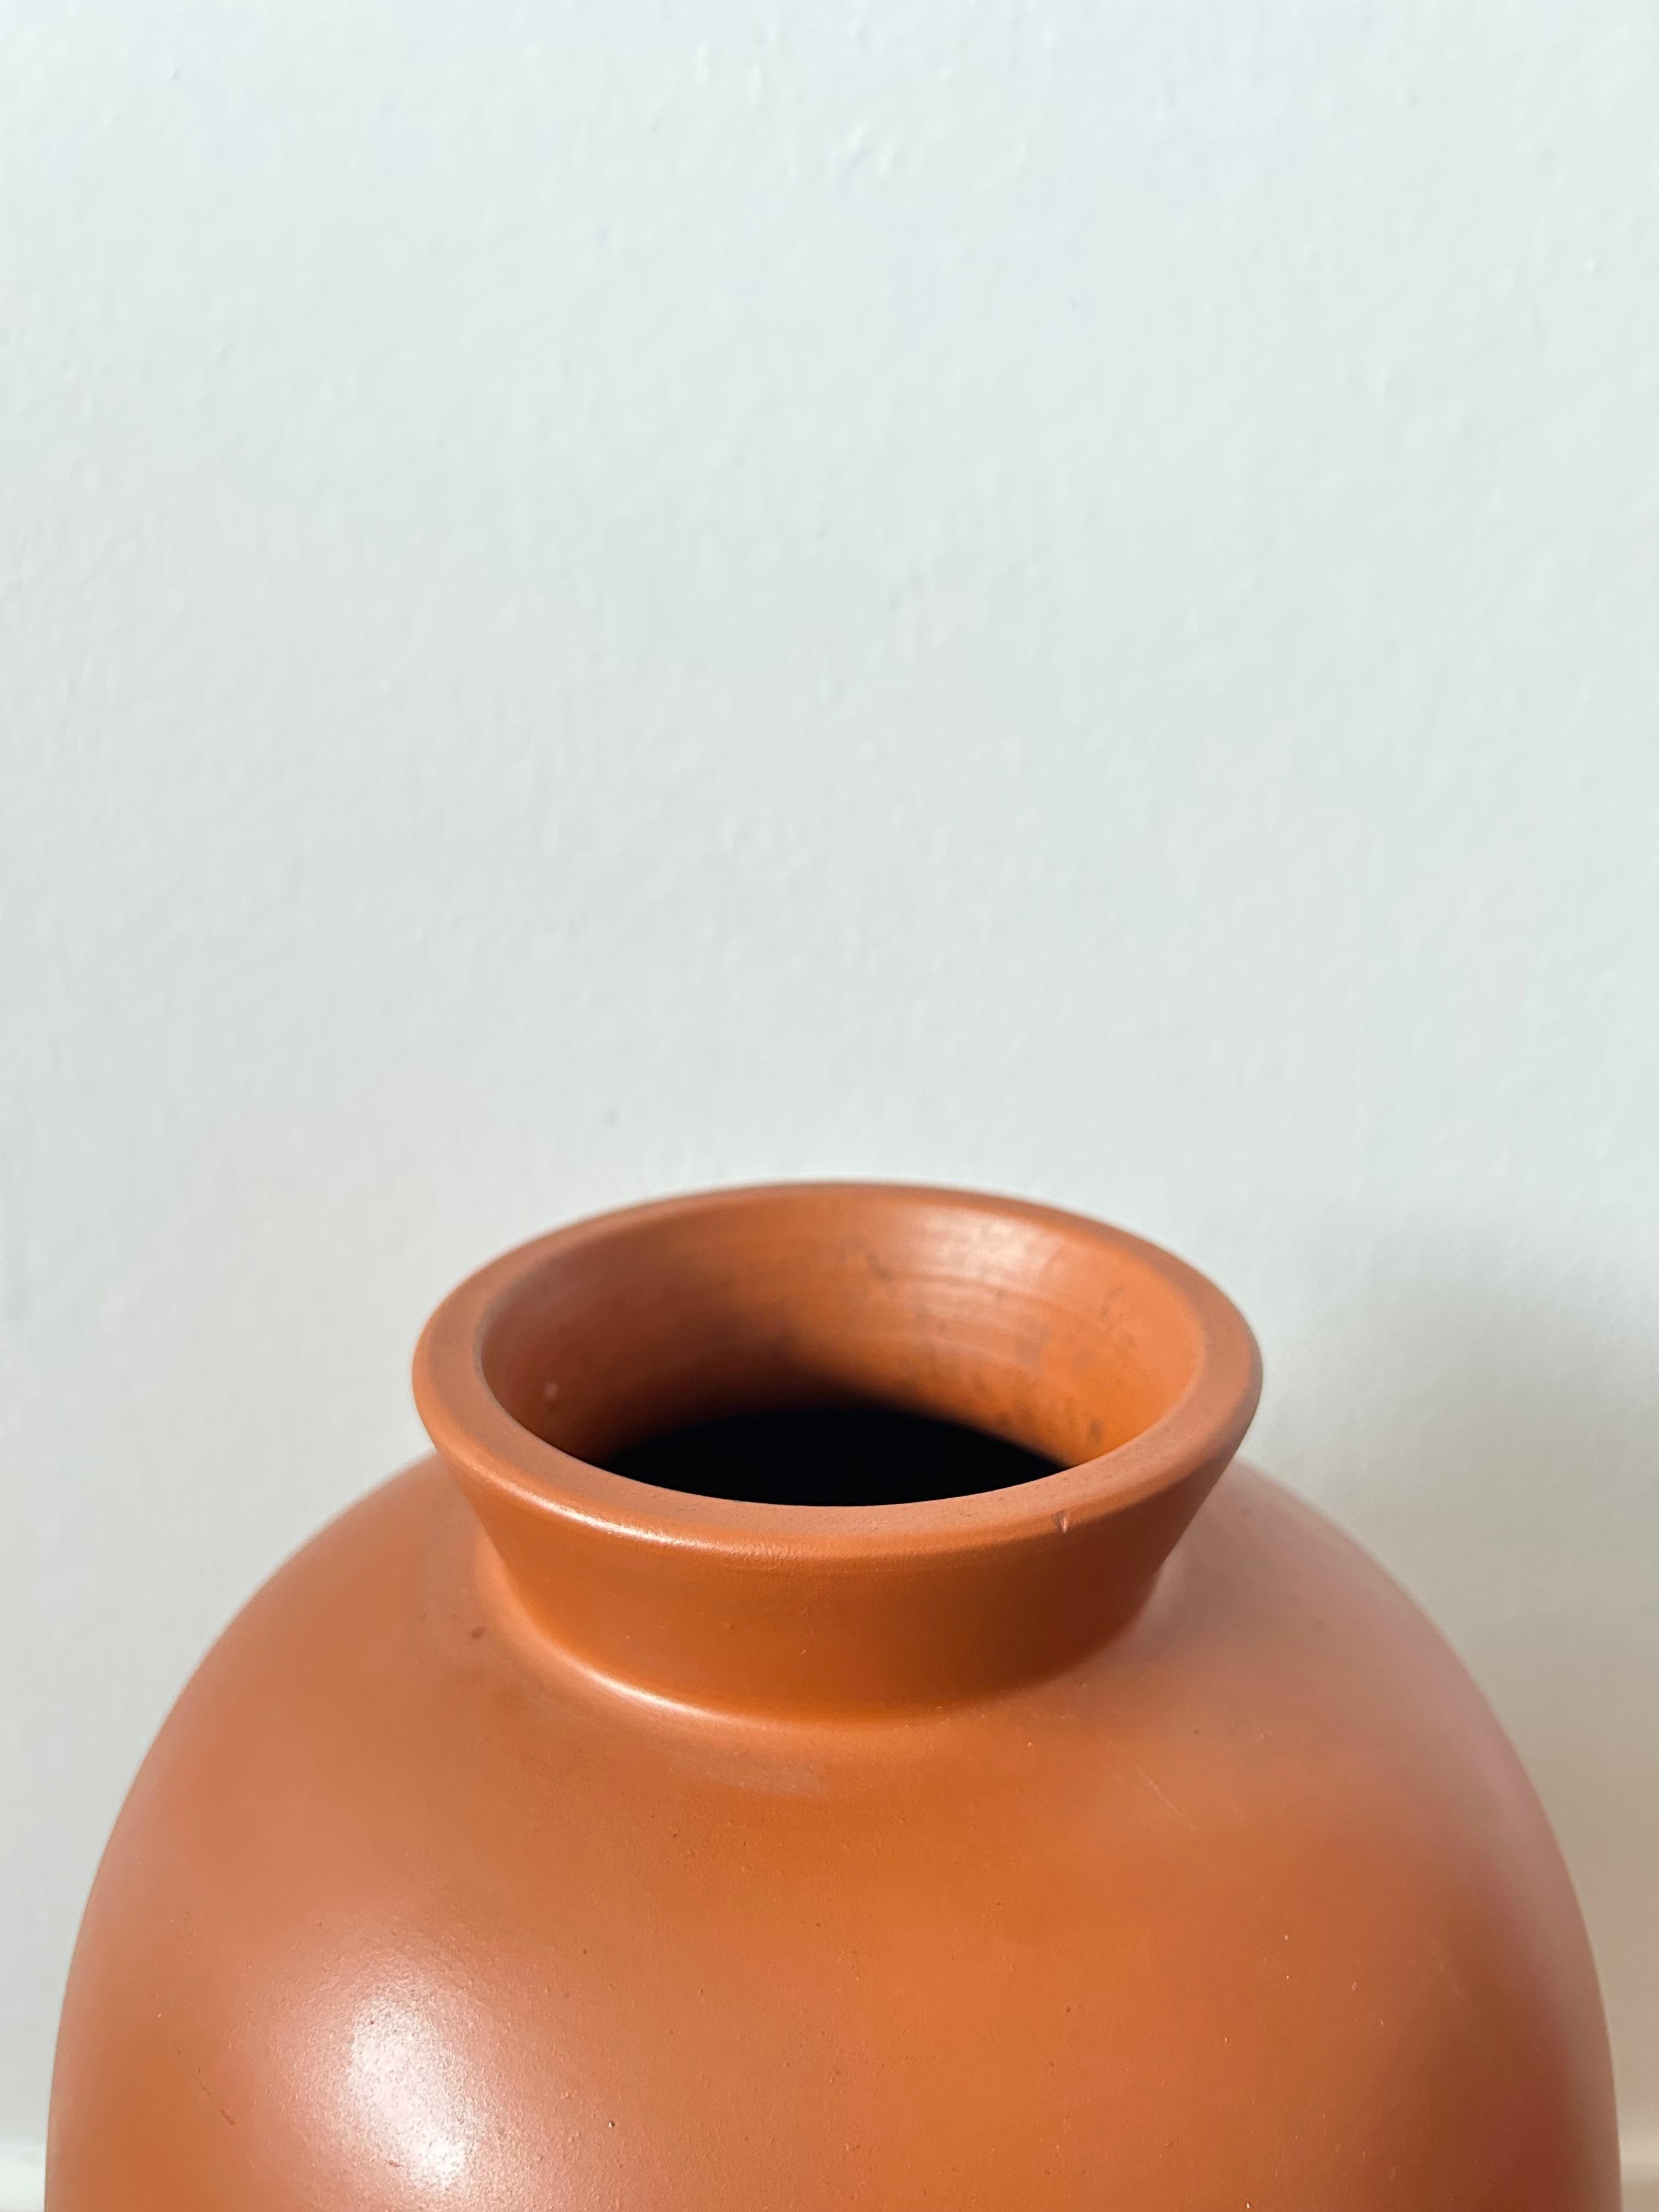 Decorative Floor Vase in Warm Tones by Upsala Ekeby, Sweden 1960’s In Good Condition For Sale In Valby, 84